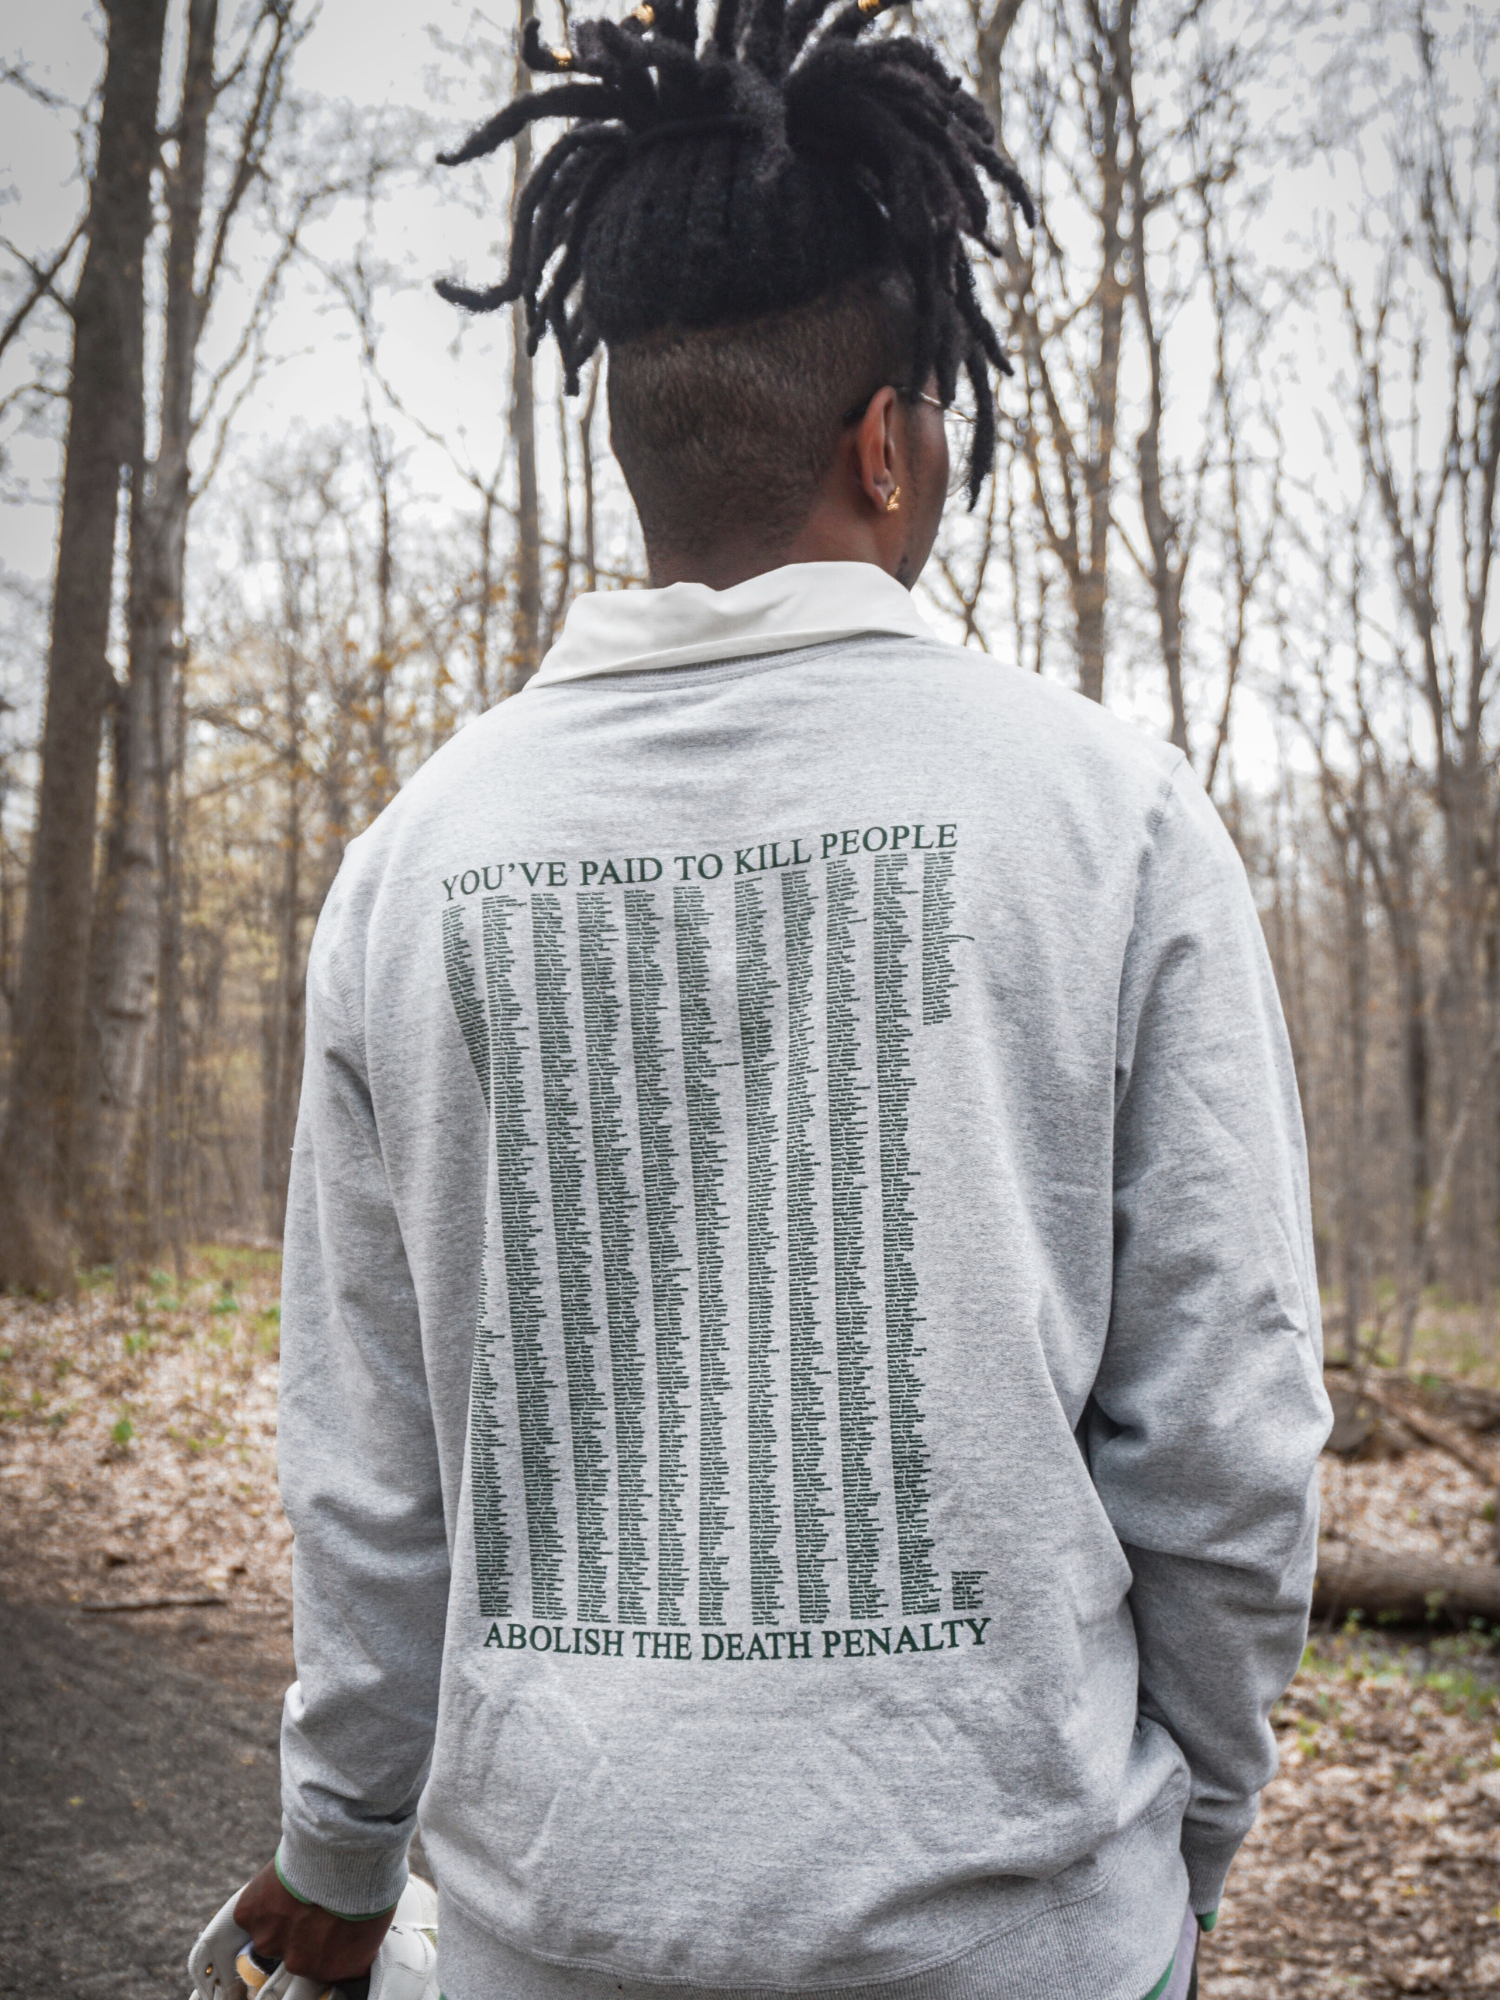 Death Penalty Kills People Recycled Crewneck